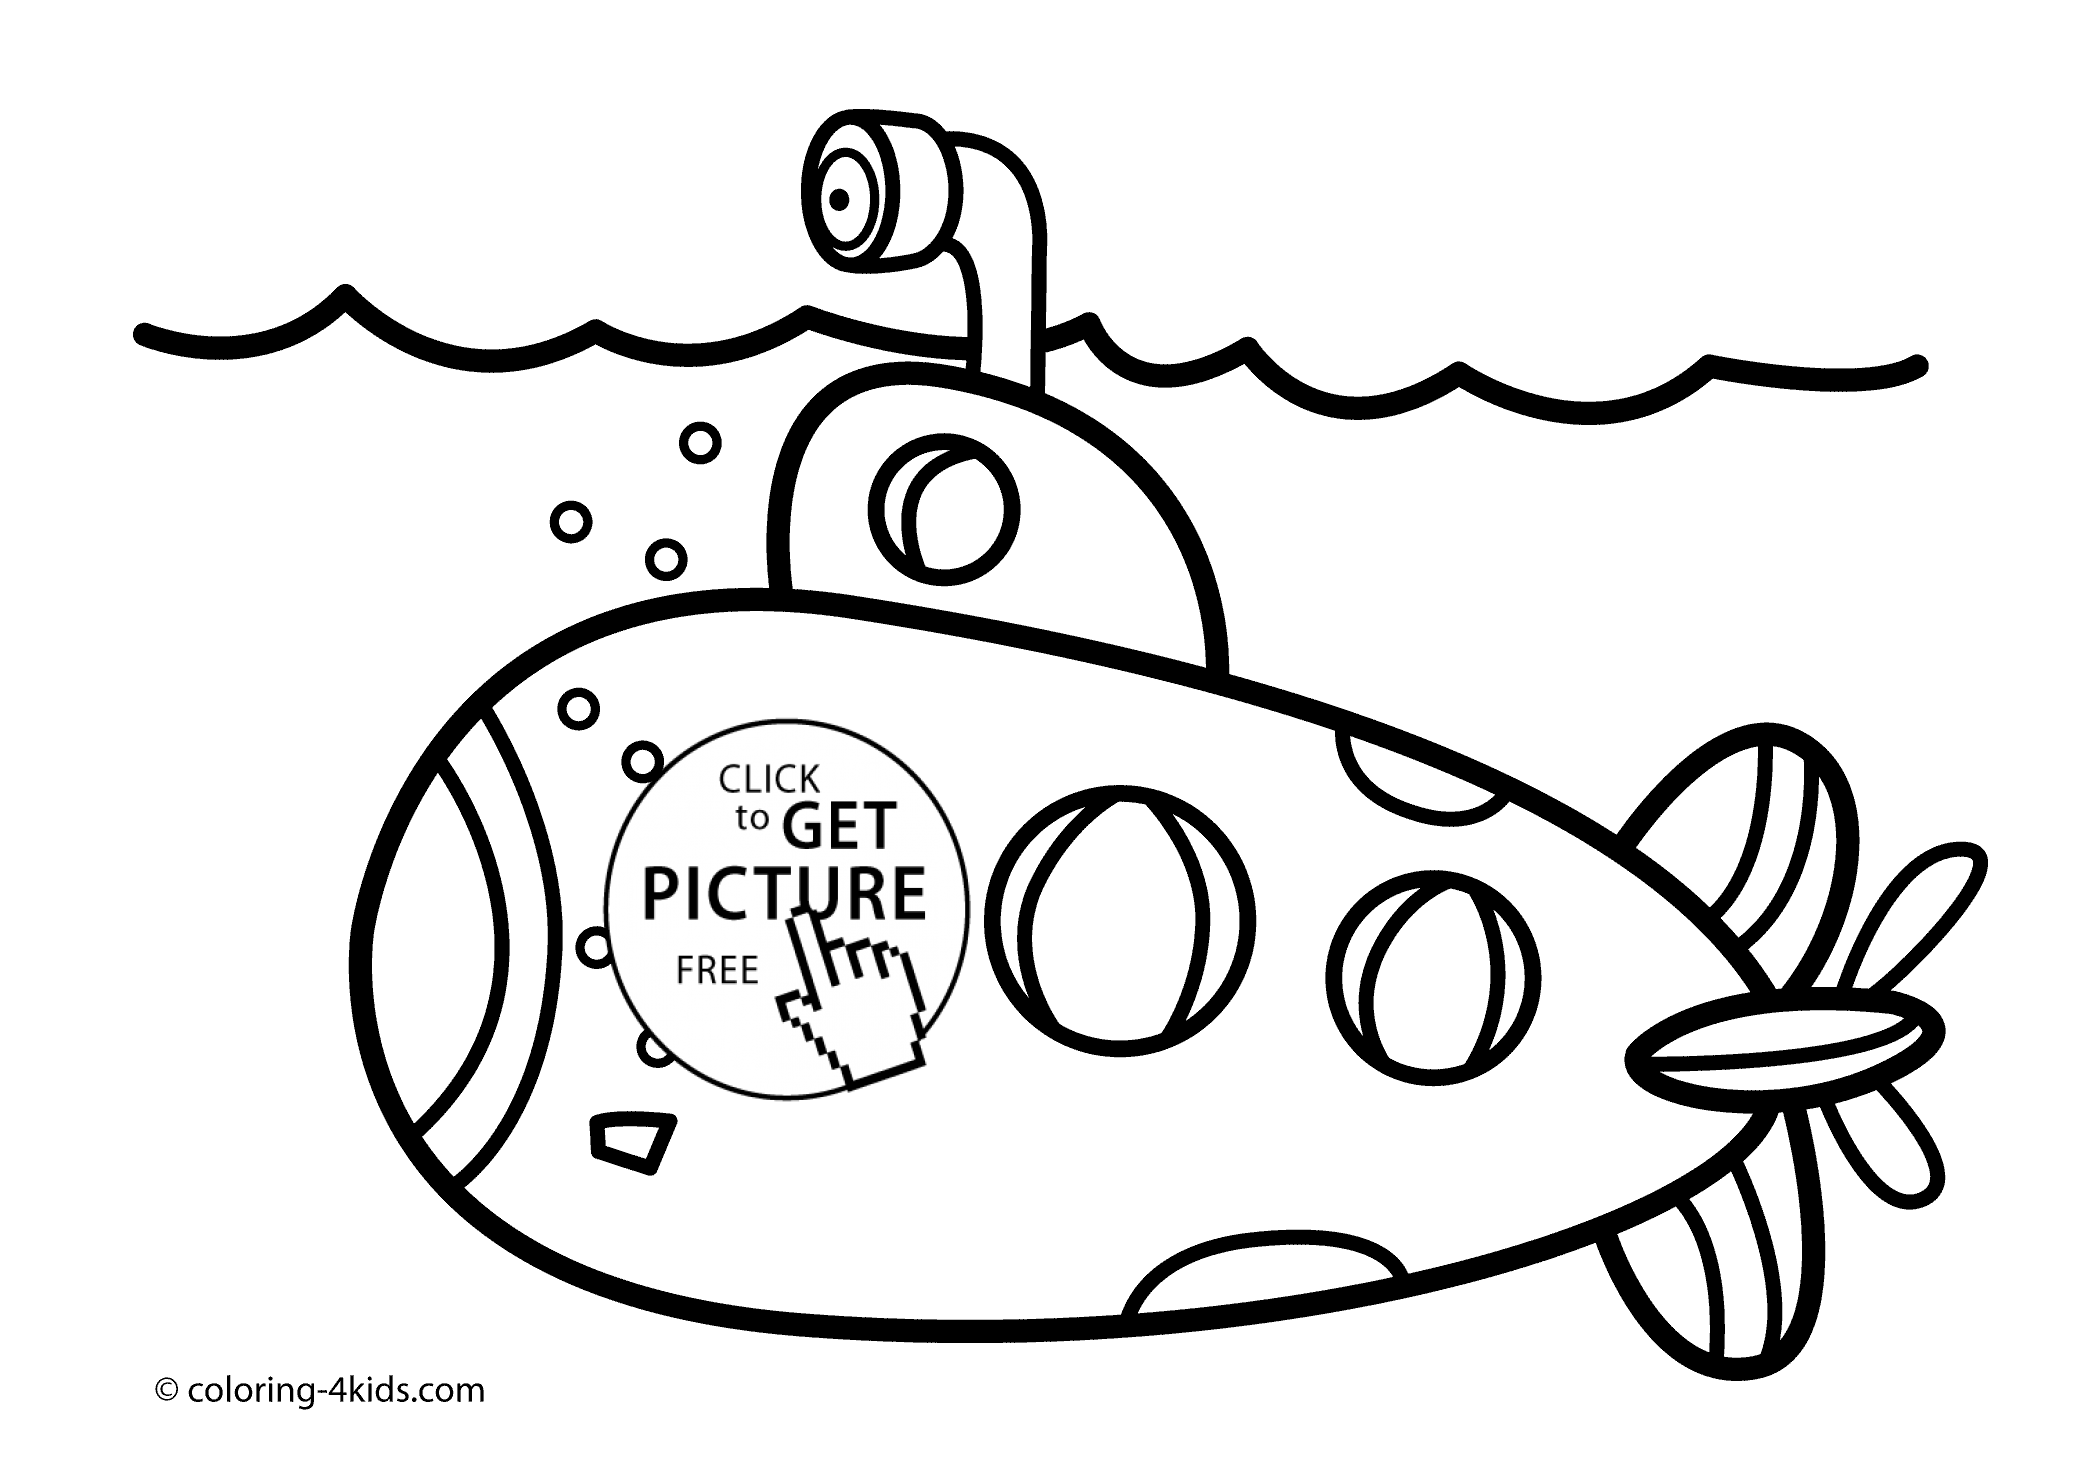 Download Free Coloring Pages Of Submarines B111 Coloring Pages Concert